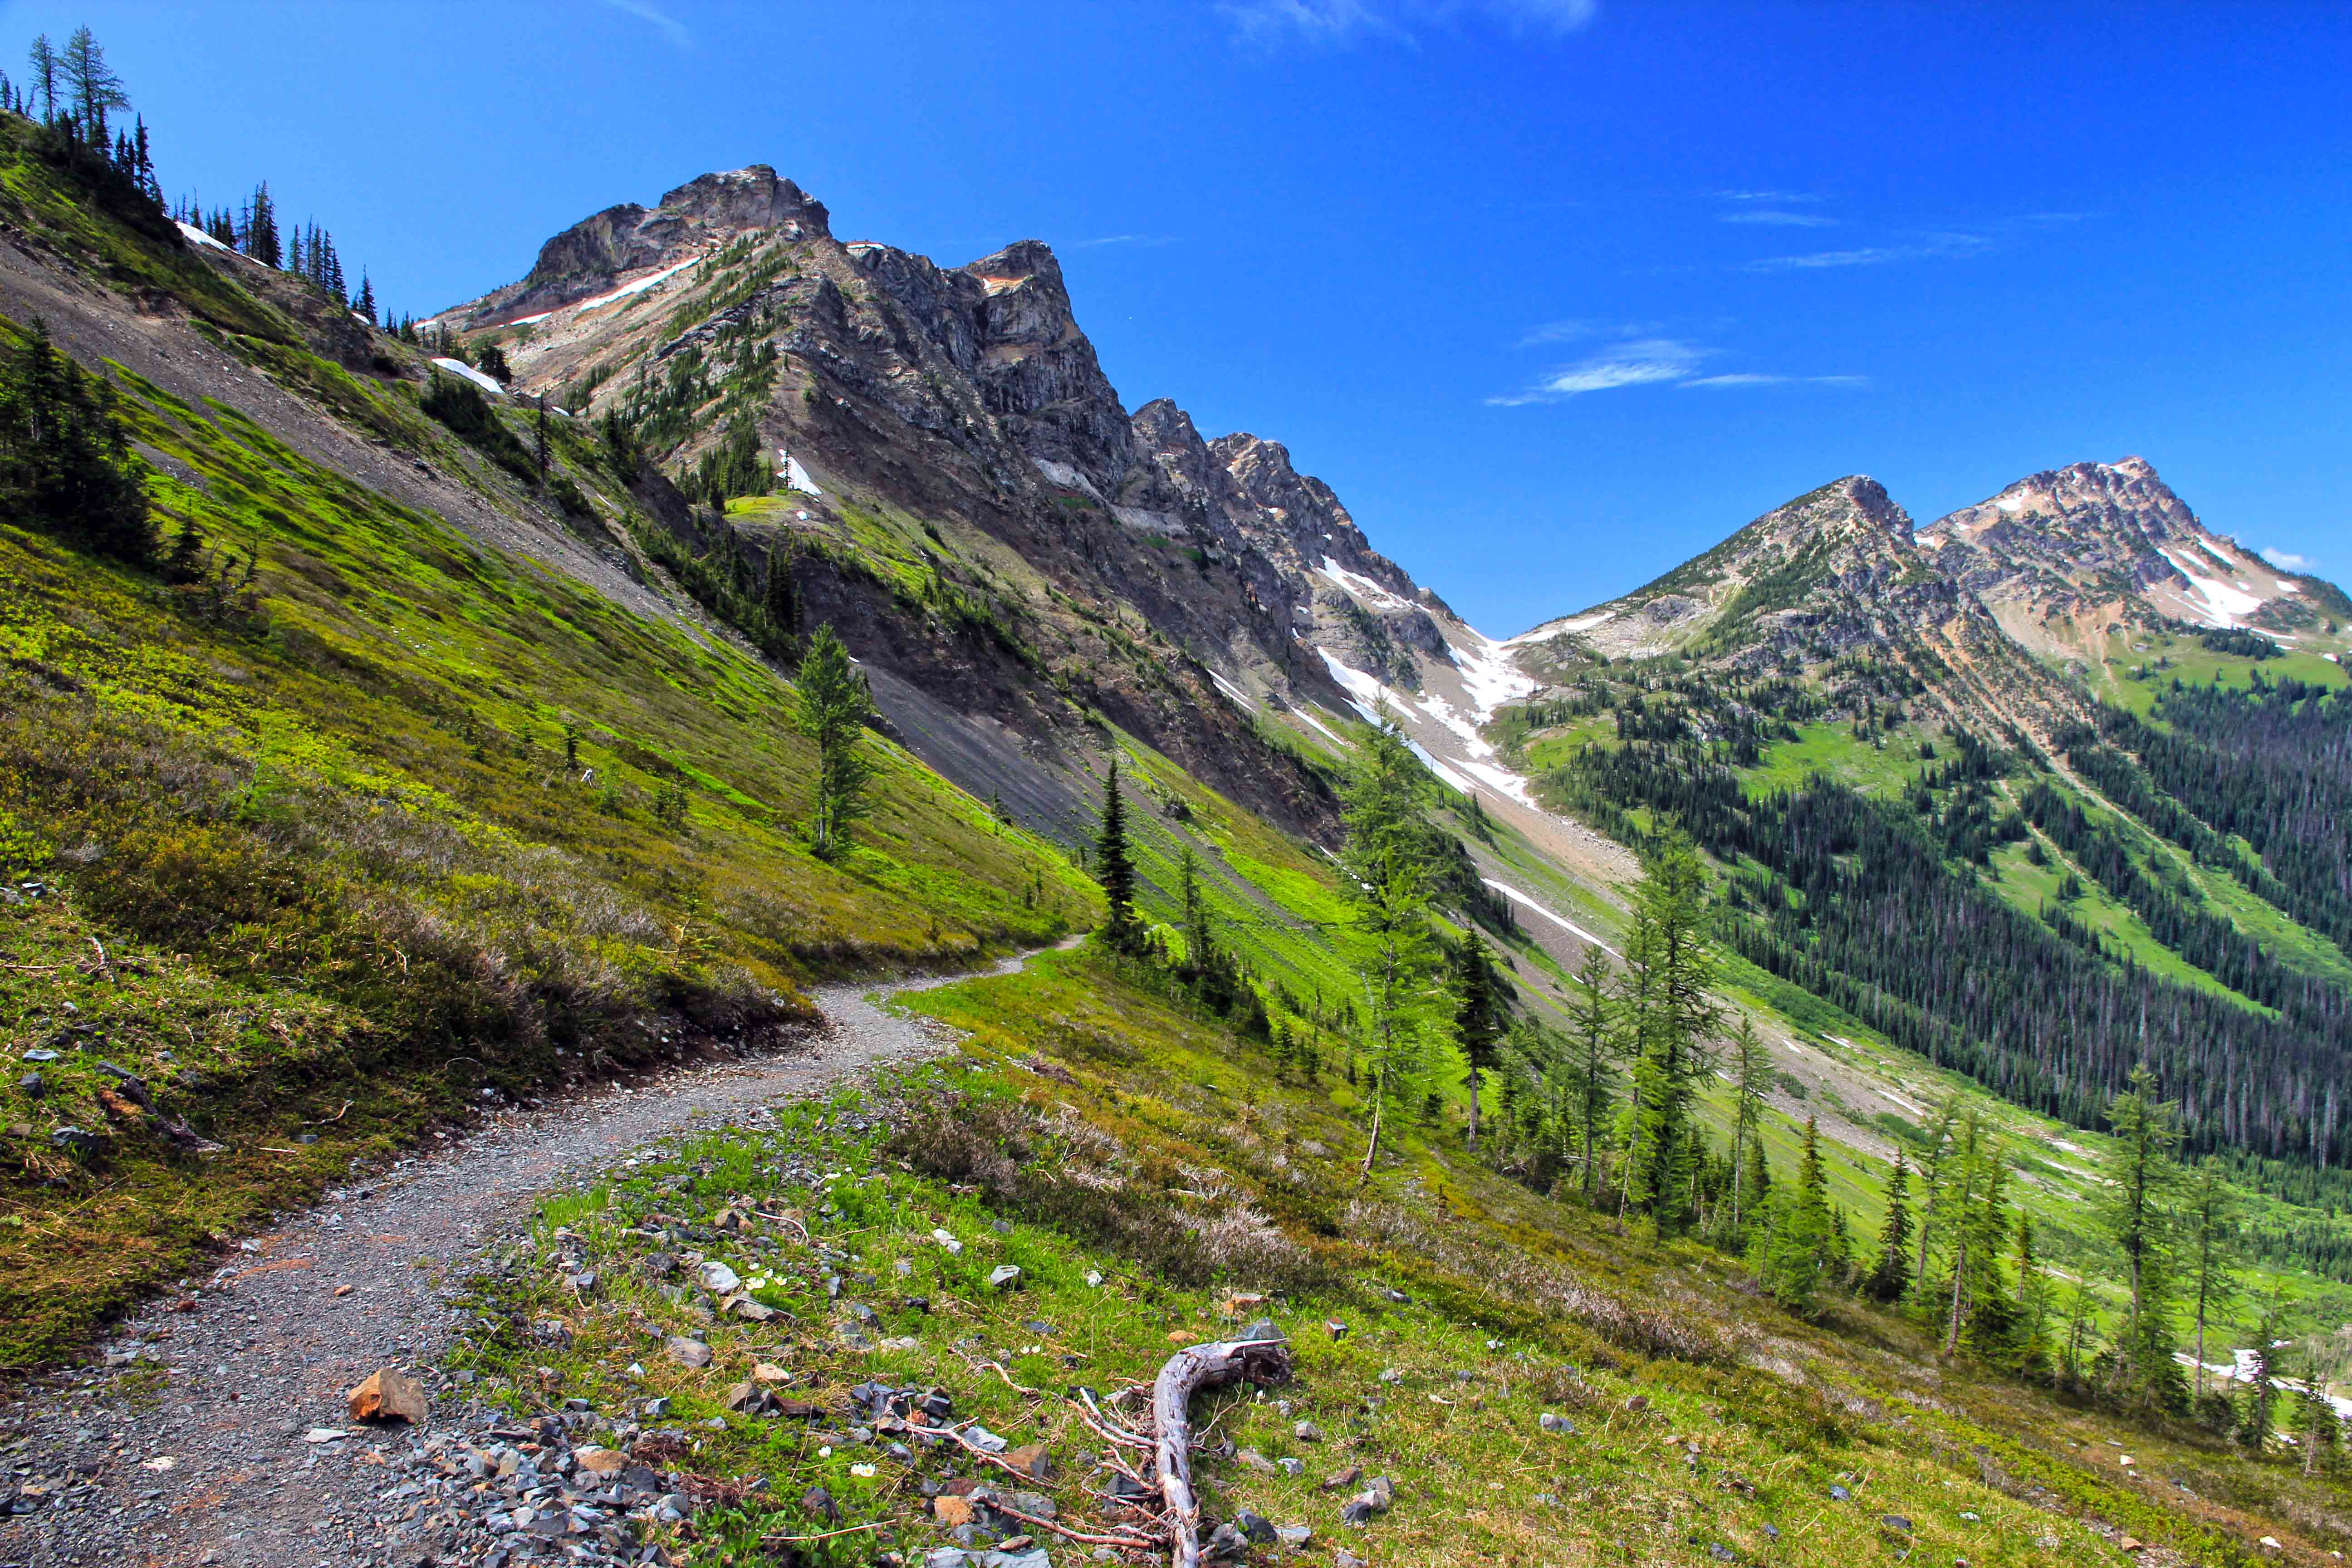 The Pacific Crest Trail as it winds through Washington State.